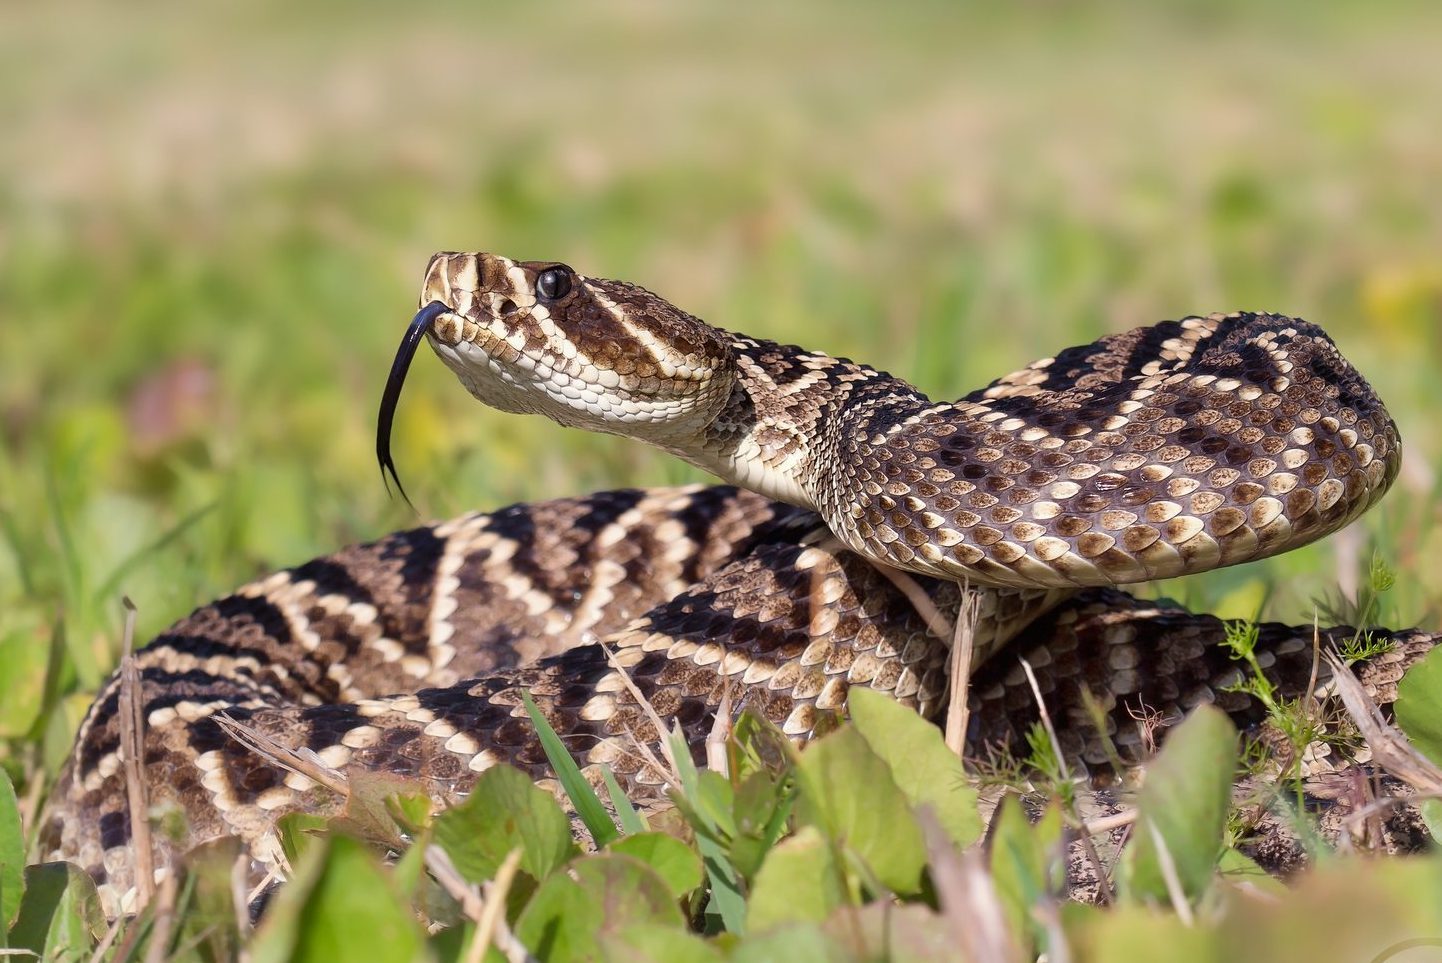 8 Types of Venomous Snakes in Your Yard